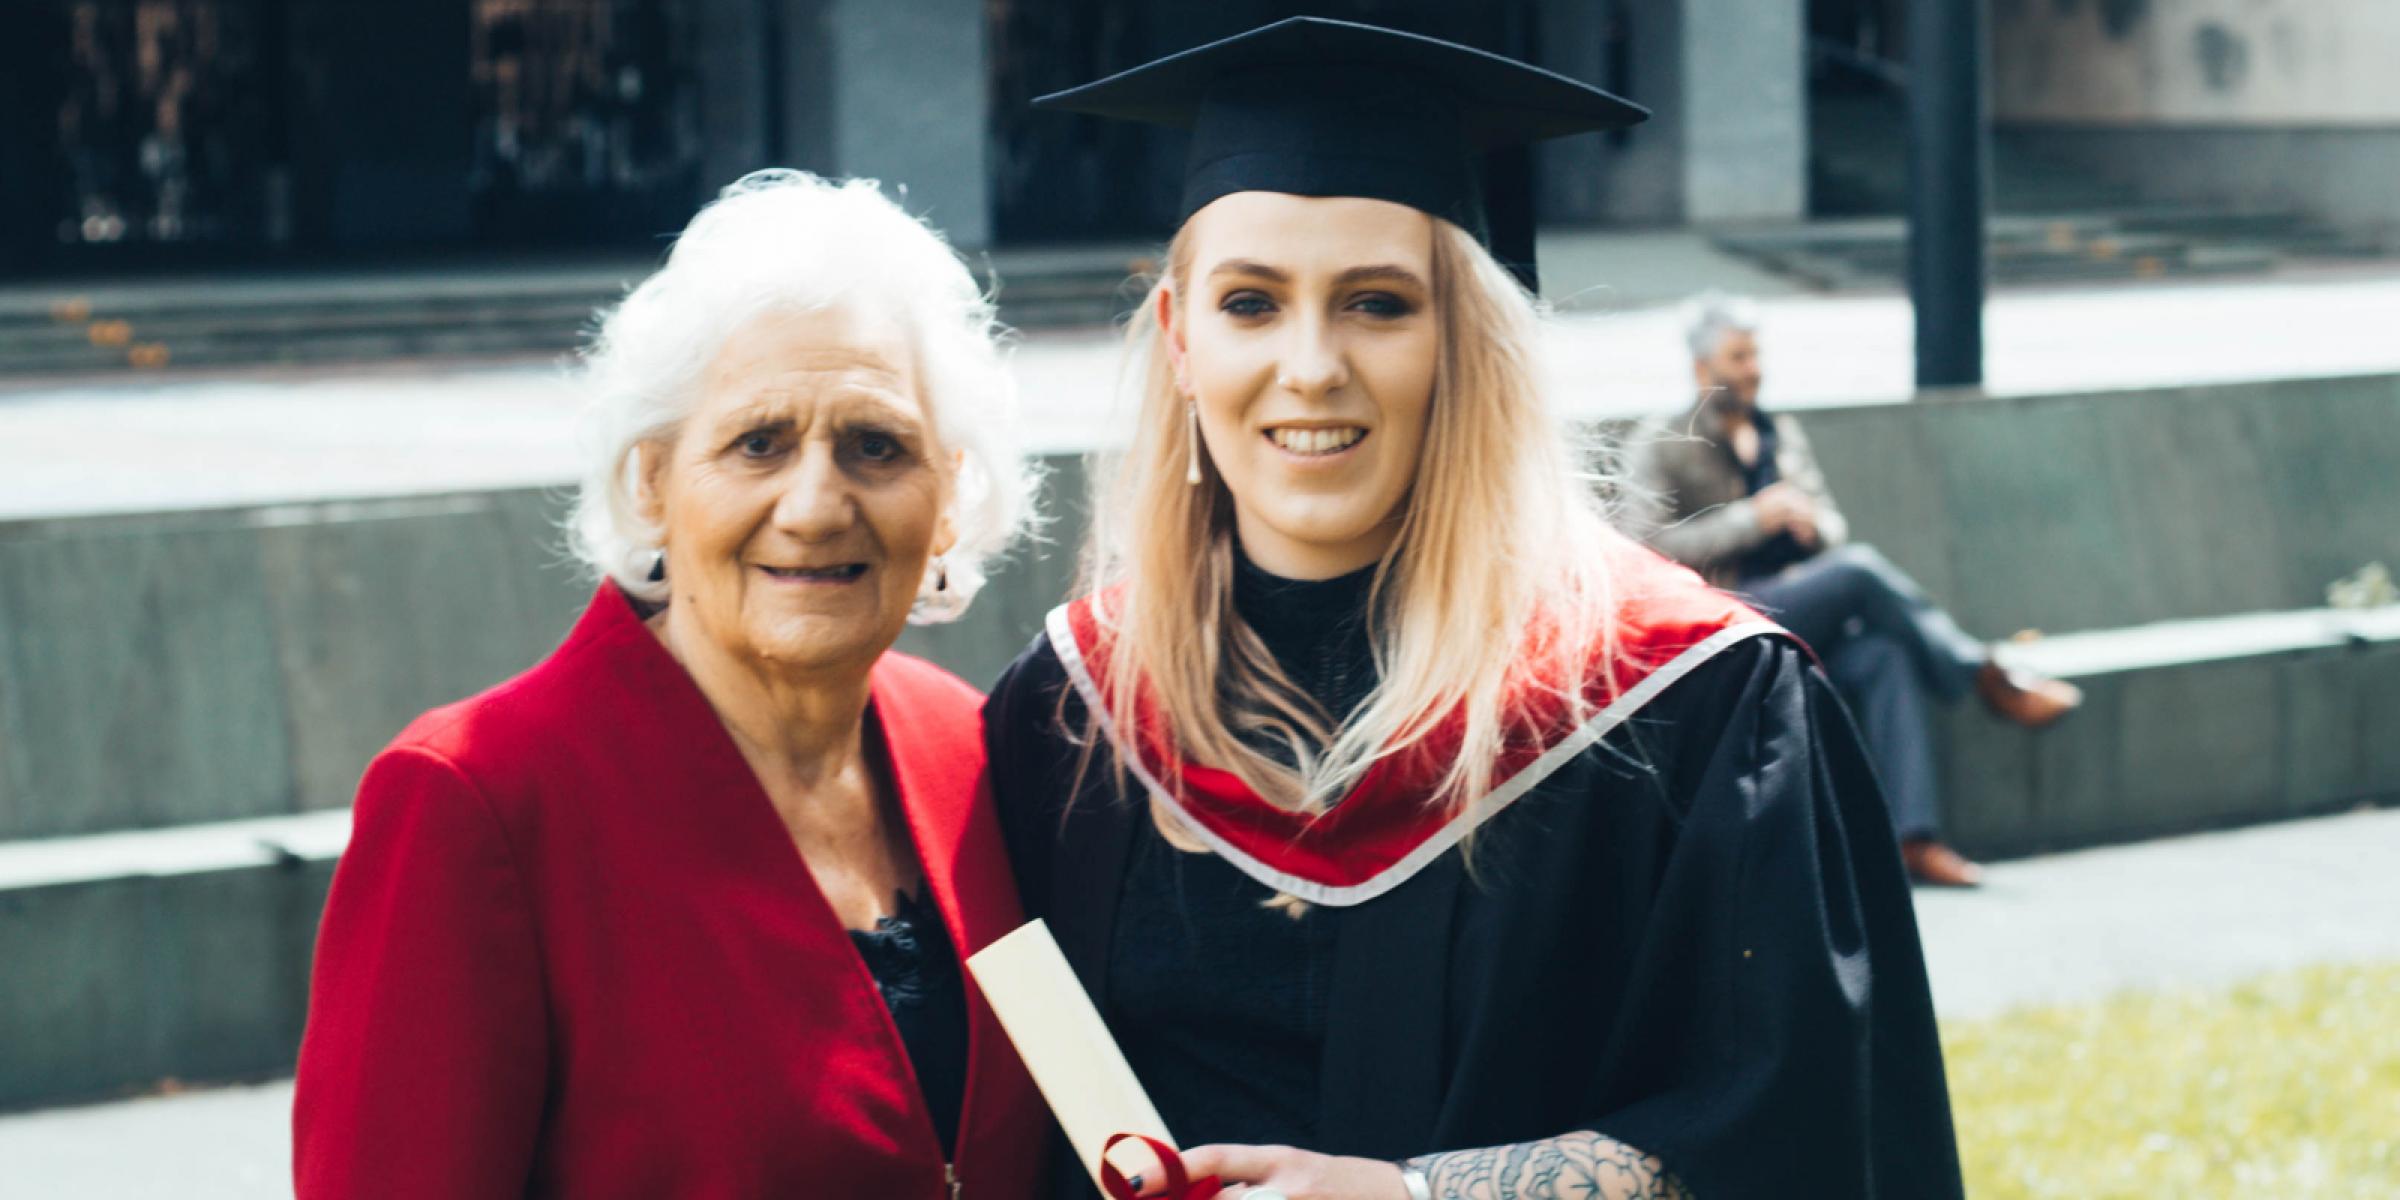 India with her grandmother Brenda on Graduation Day, July 2017